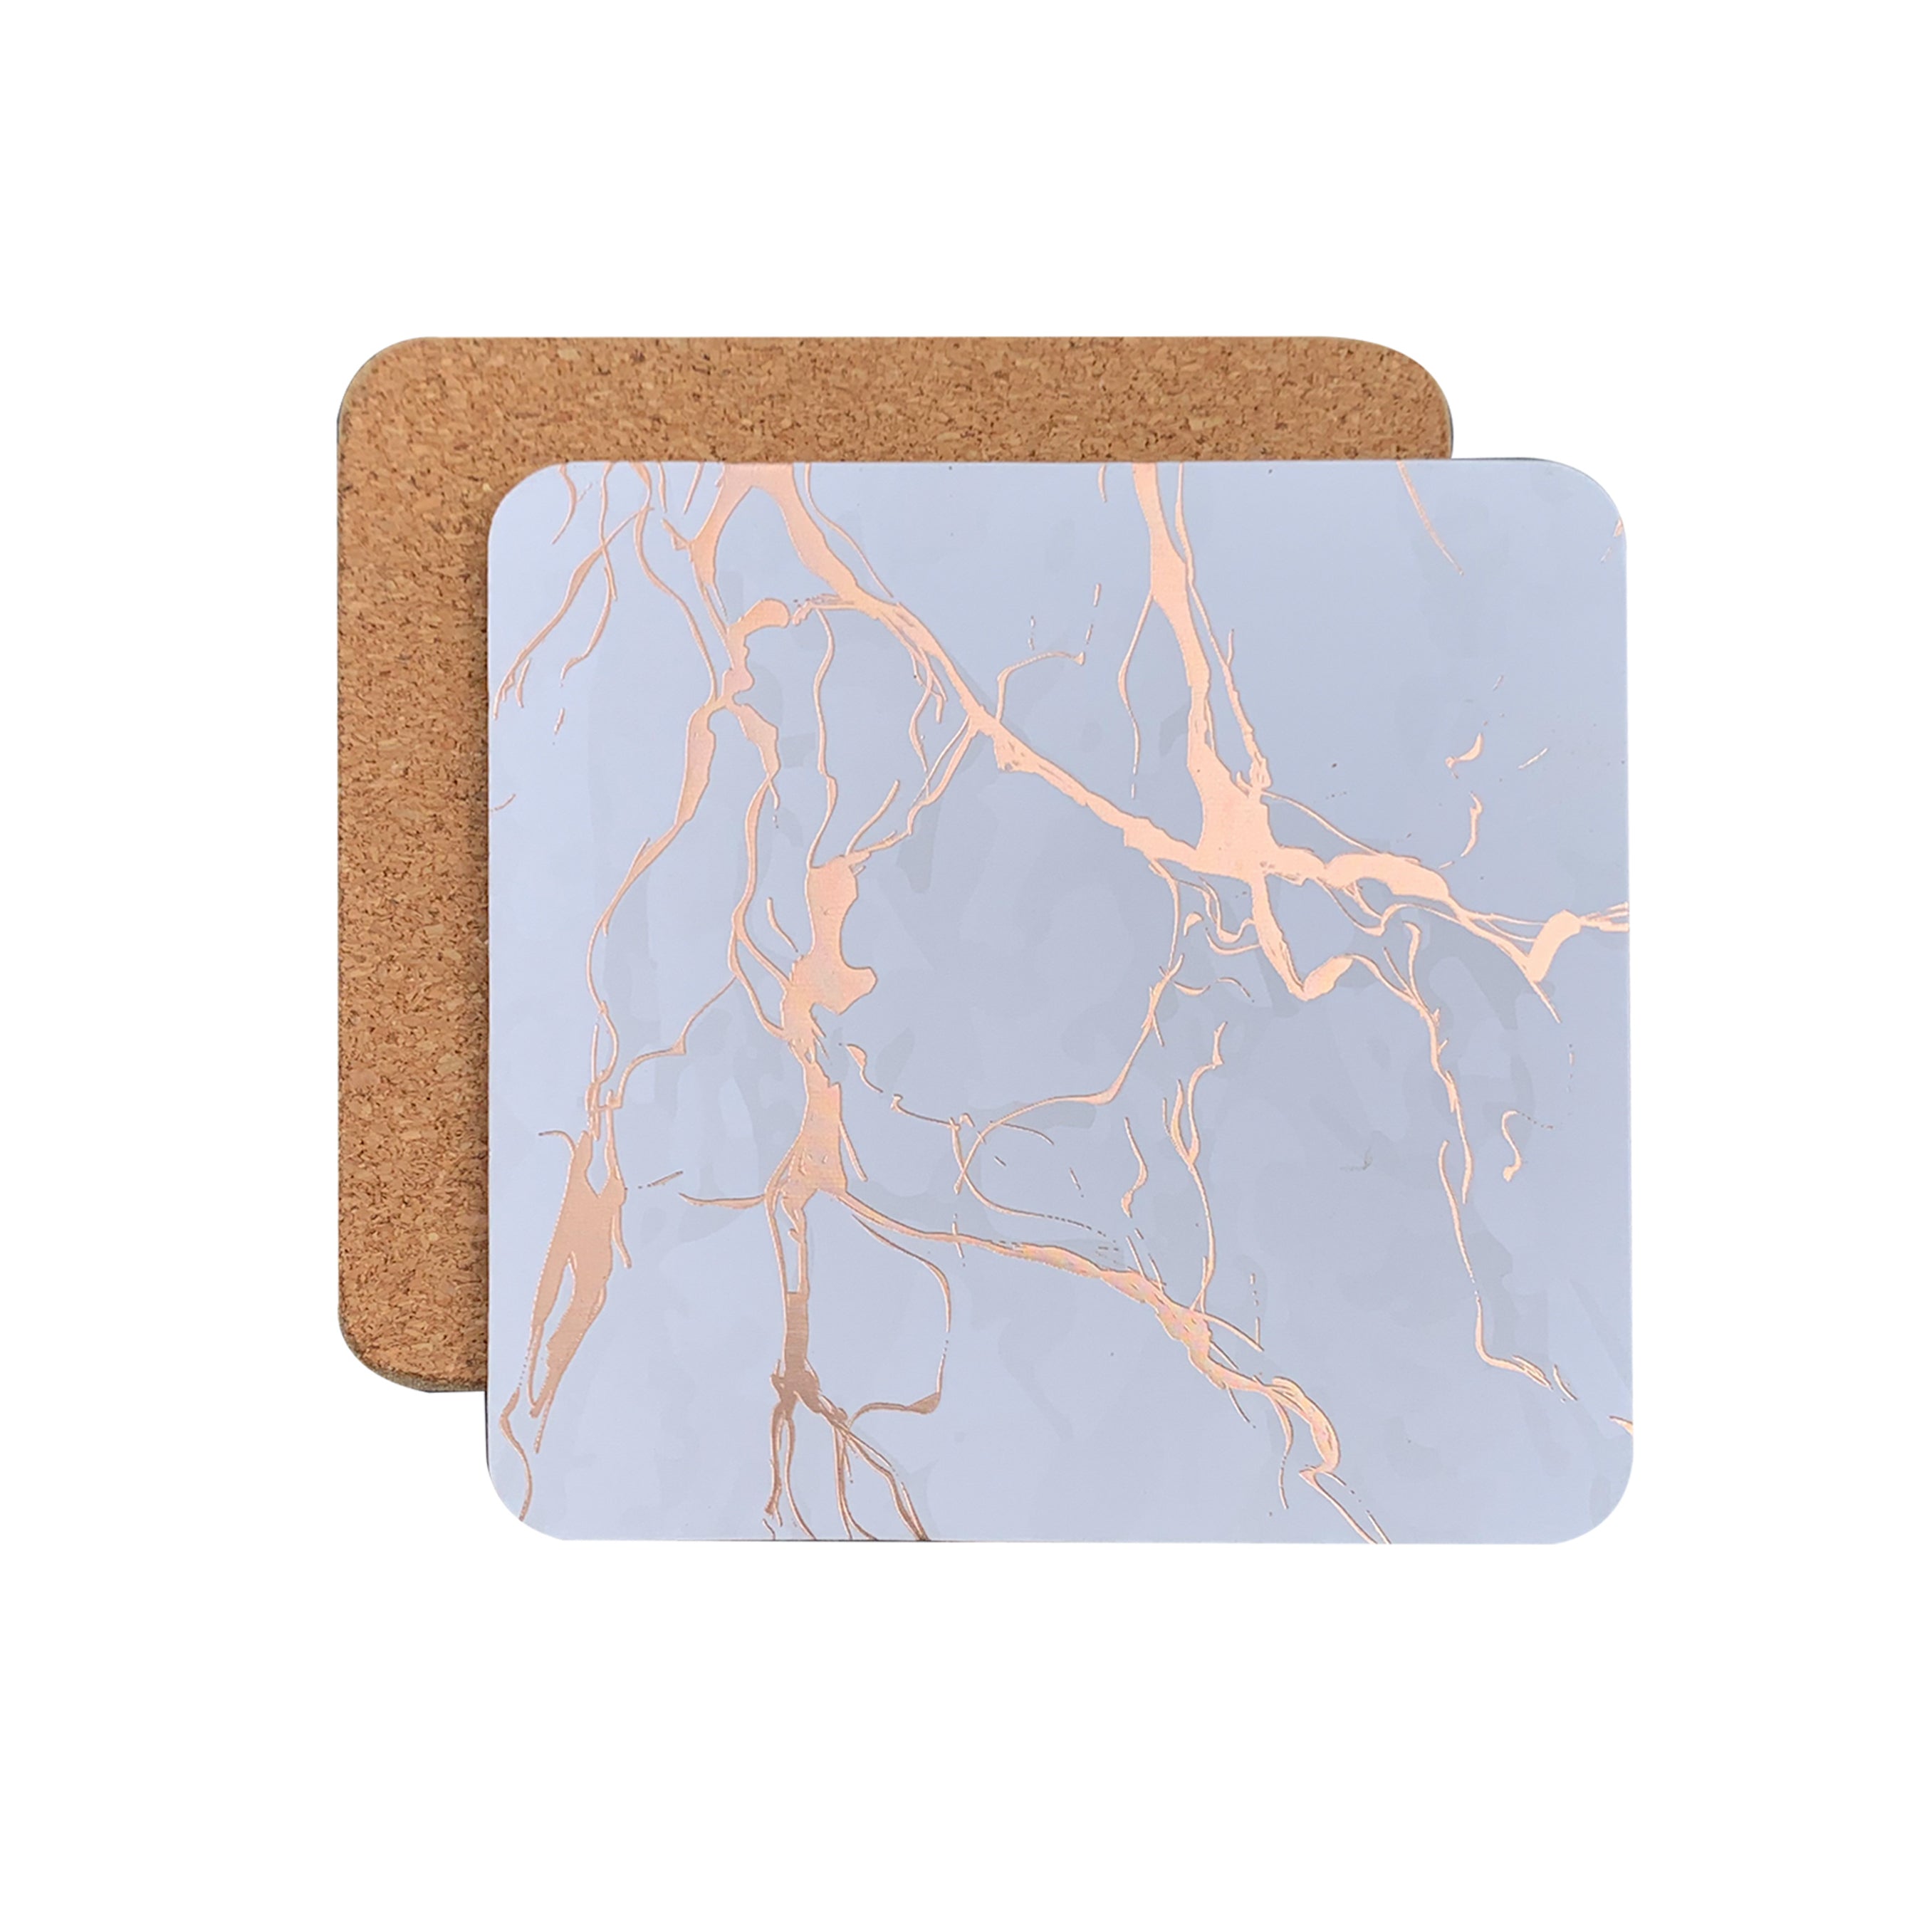 Dainty Home Marble Cork Foil Printed Marble Granite Designed Thick Cork Textured 4" x 4" Square Coasters